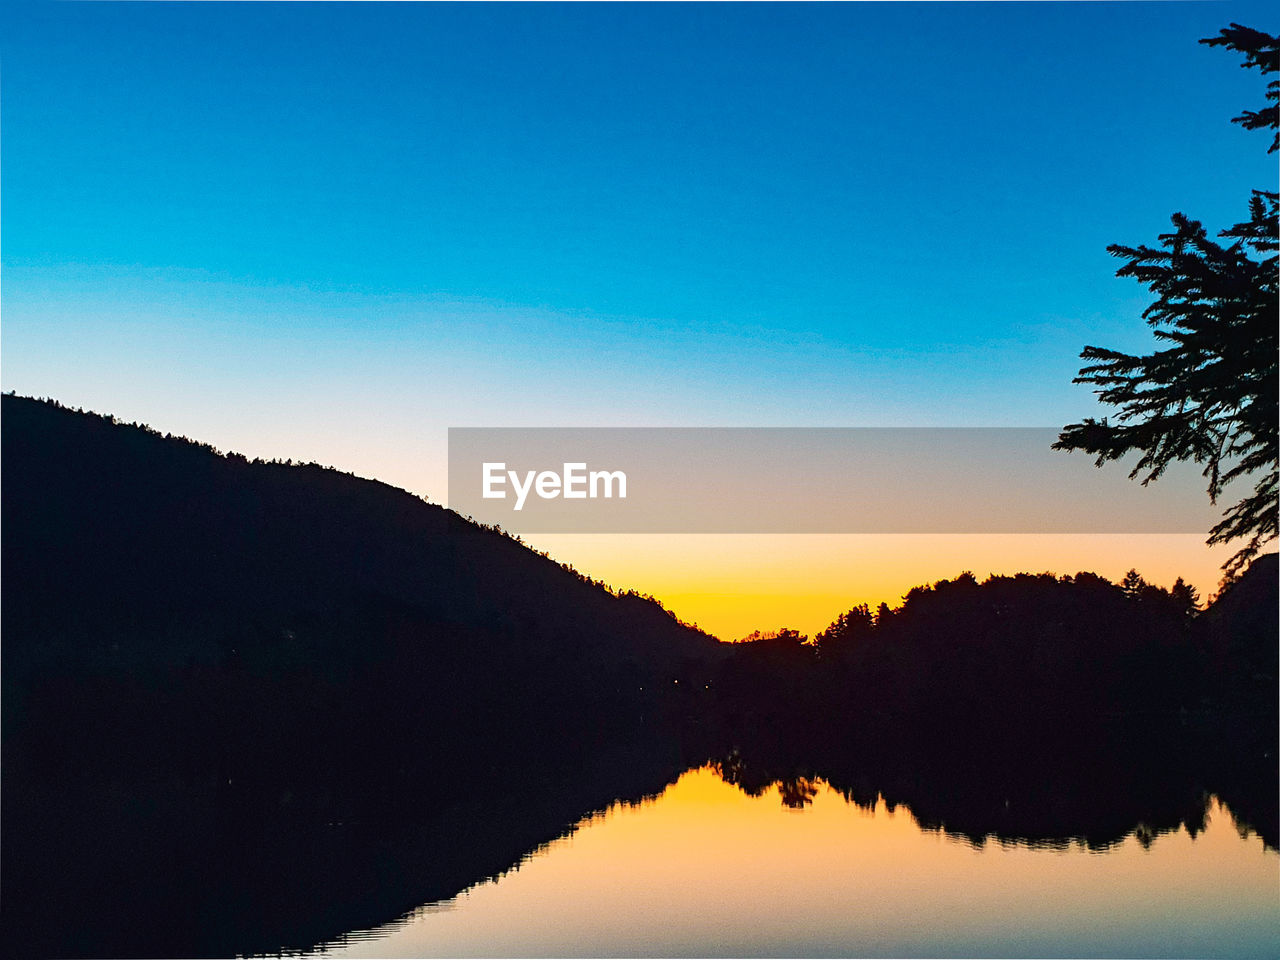 SCENIC VIEW OF LAKE AGAINST SKY AT SUNSET